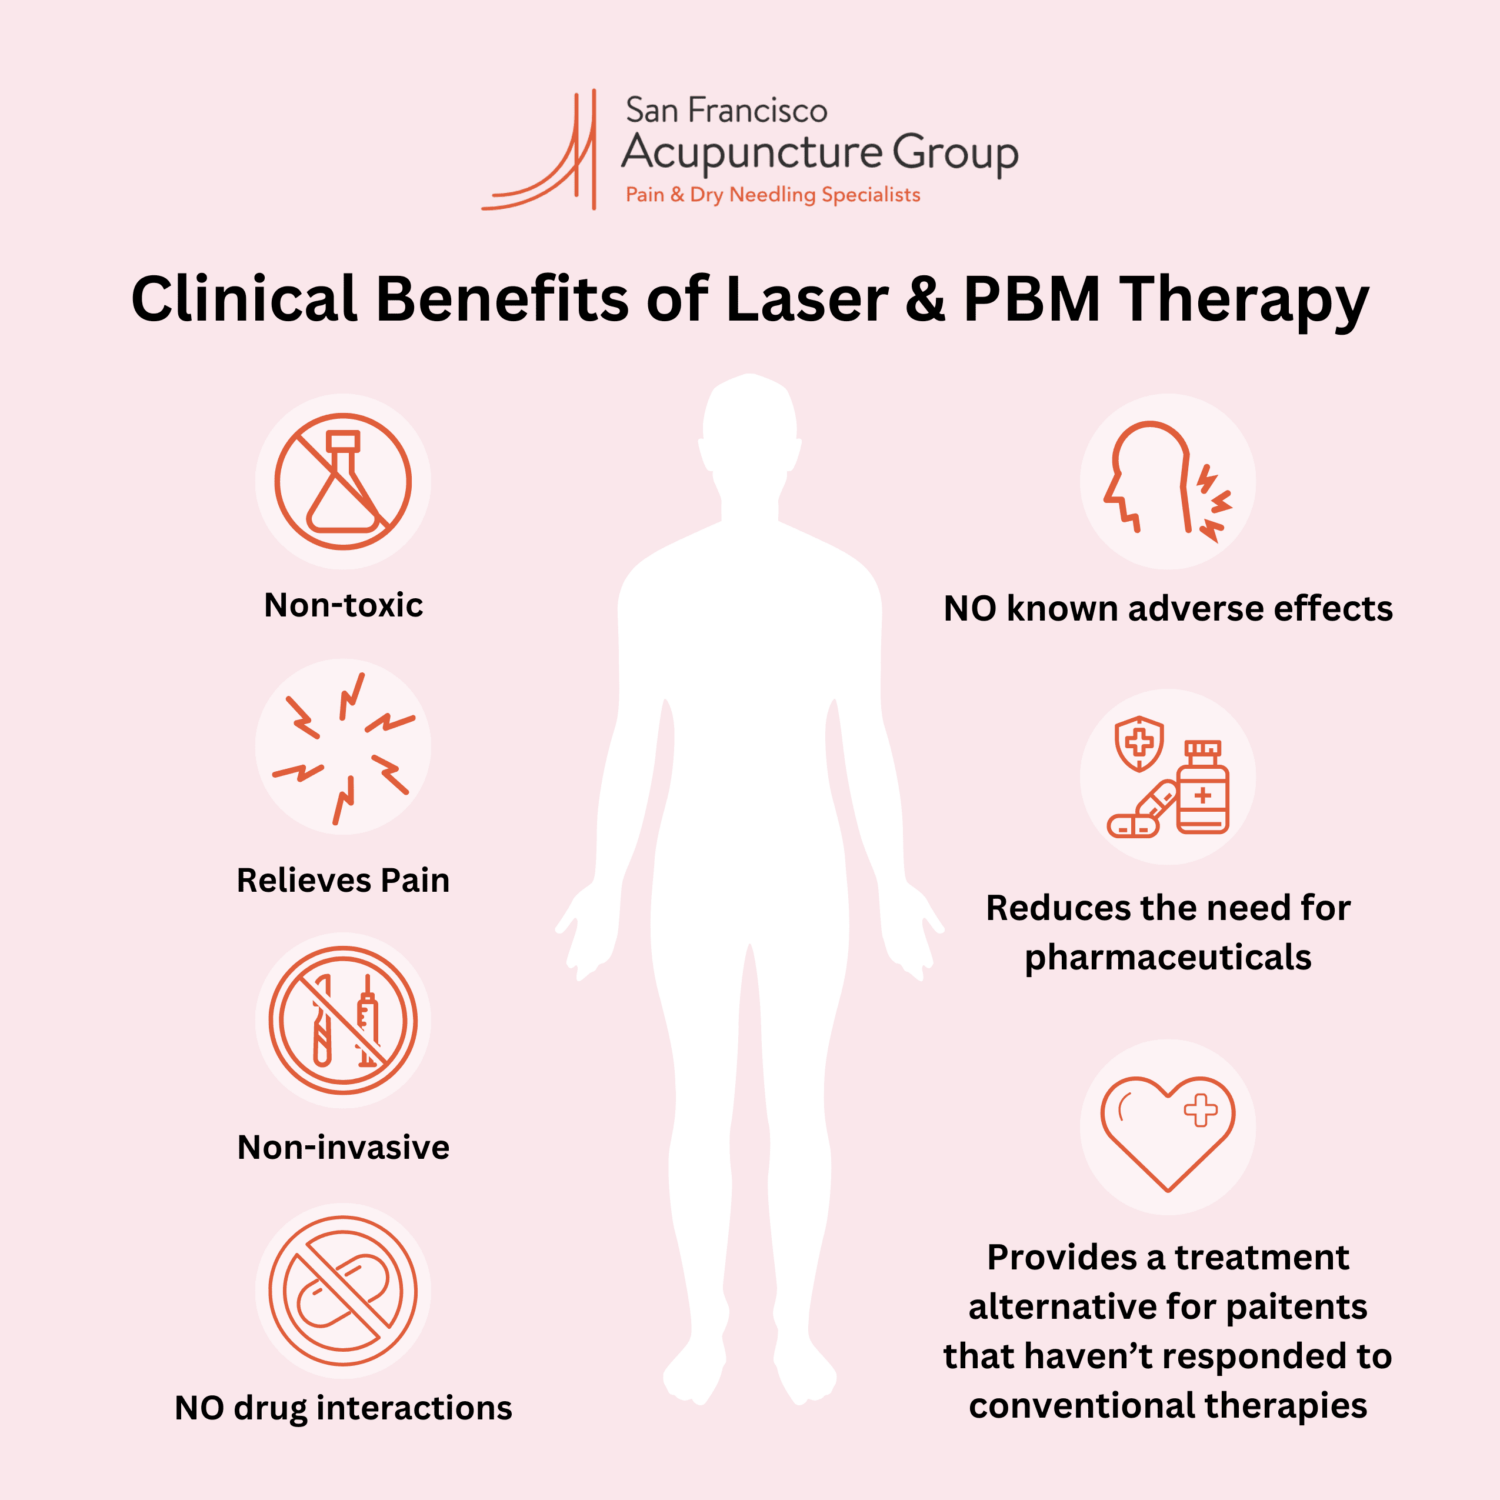 Infographic illustrating Clinical Benefits of PBM: Non-toxic, Relieves pain, Non-invasive, No drug interactions, No known adverse effects, Reduces the need for pharmaceuticals, Provides a treatment alternative for patients that have not responded to conventional therapies